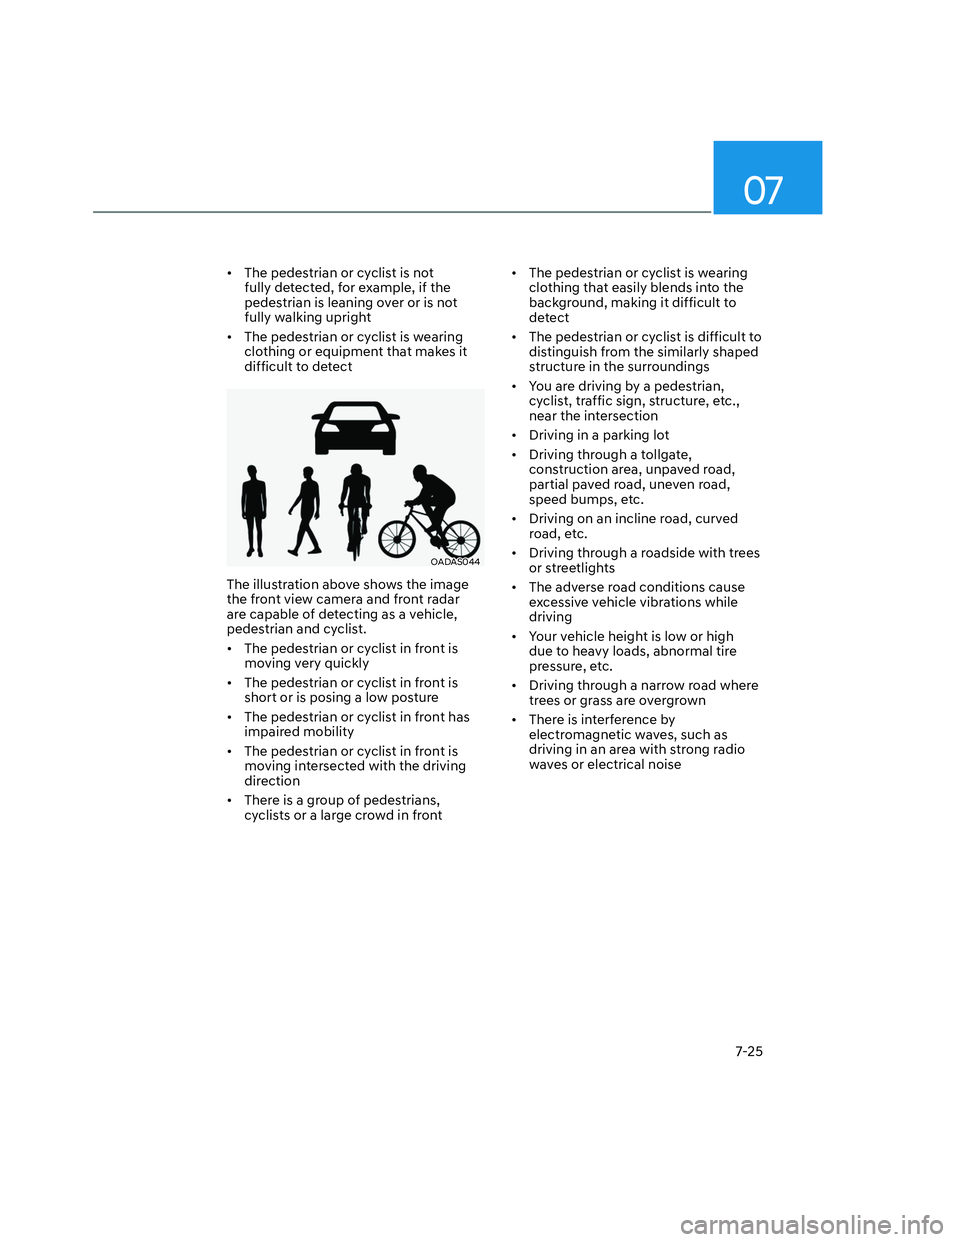 HYUNDAI SANTA CRUZ 2022 Owners Manual 07
7-25
•  The pedestrian or cyclist is not 
fully detected, for example, if the 
pedestrian is leaning over or is not 
fully walking upright
•  The pedestrian or cyclist is wearing 
clothing or e